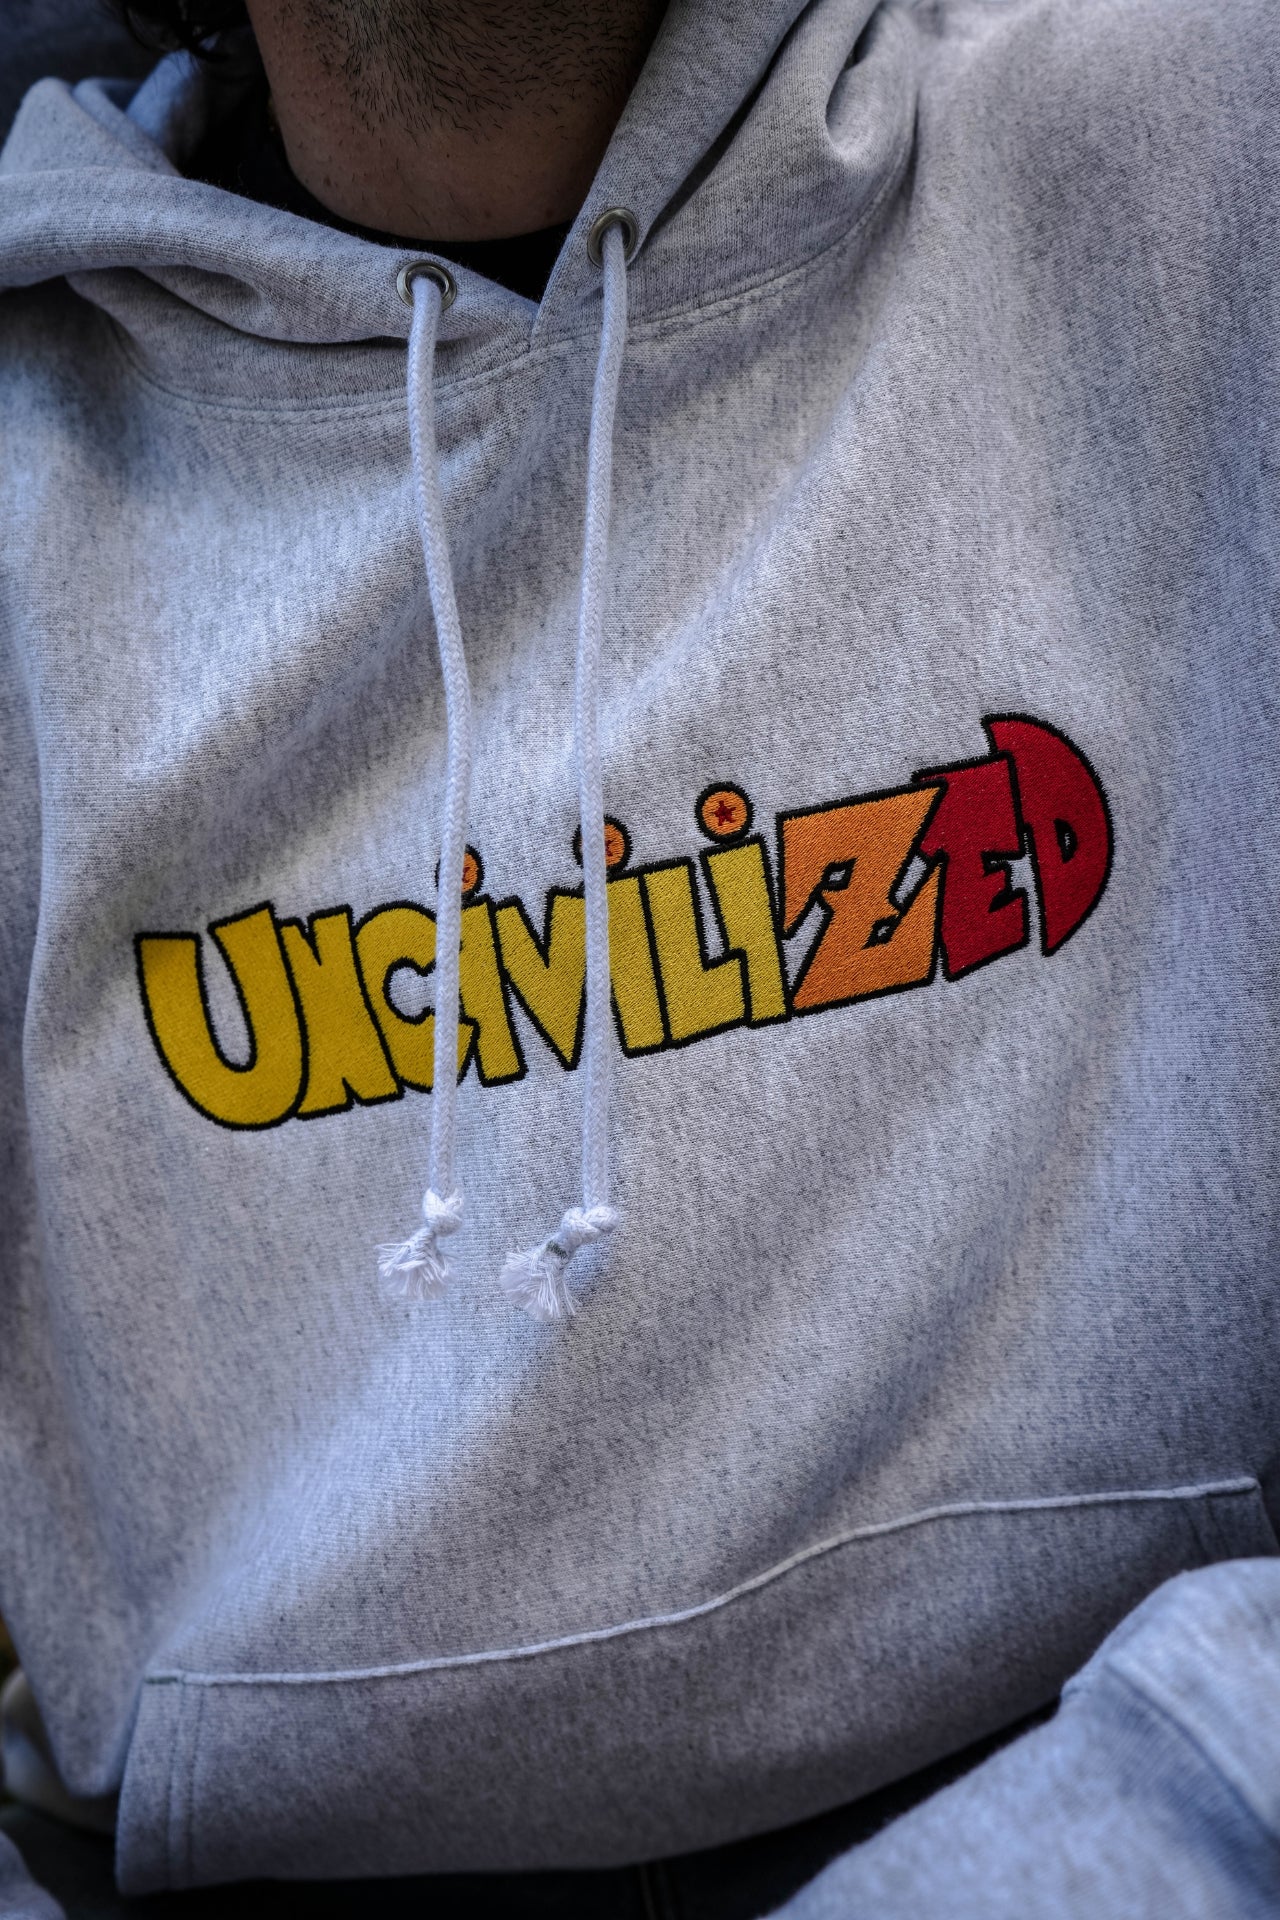 EARLY ACCESS: UNCIVILIZED "SUPER SAIYAN" HOODIE